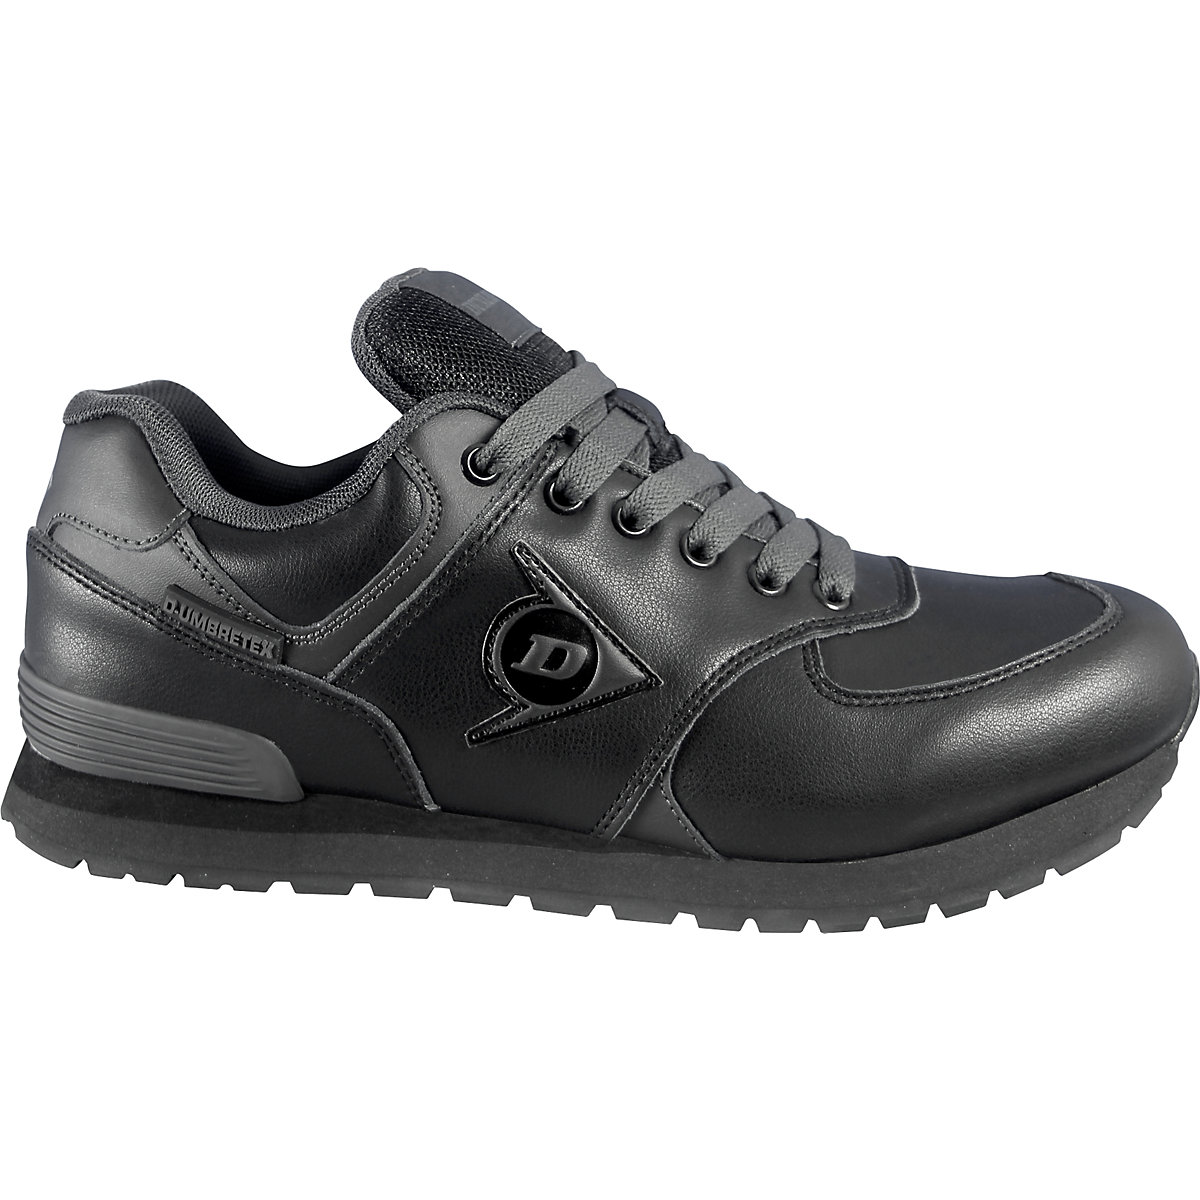 FLYING WING AIB safety lace-up shoes – DUNLOP